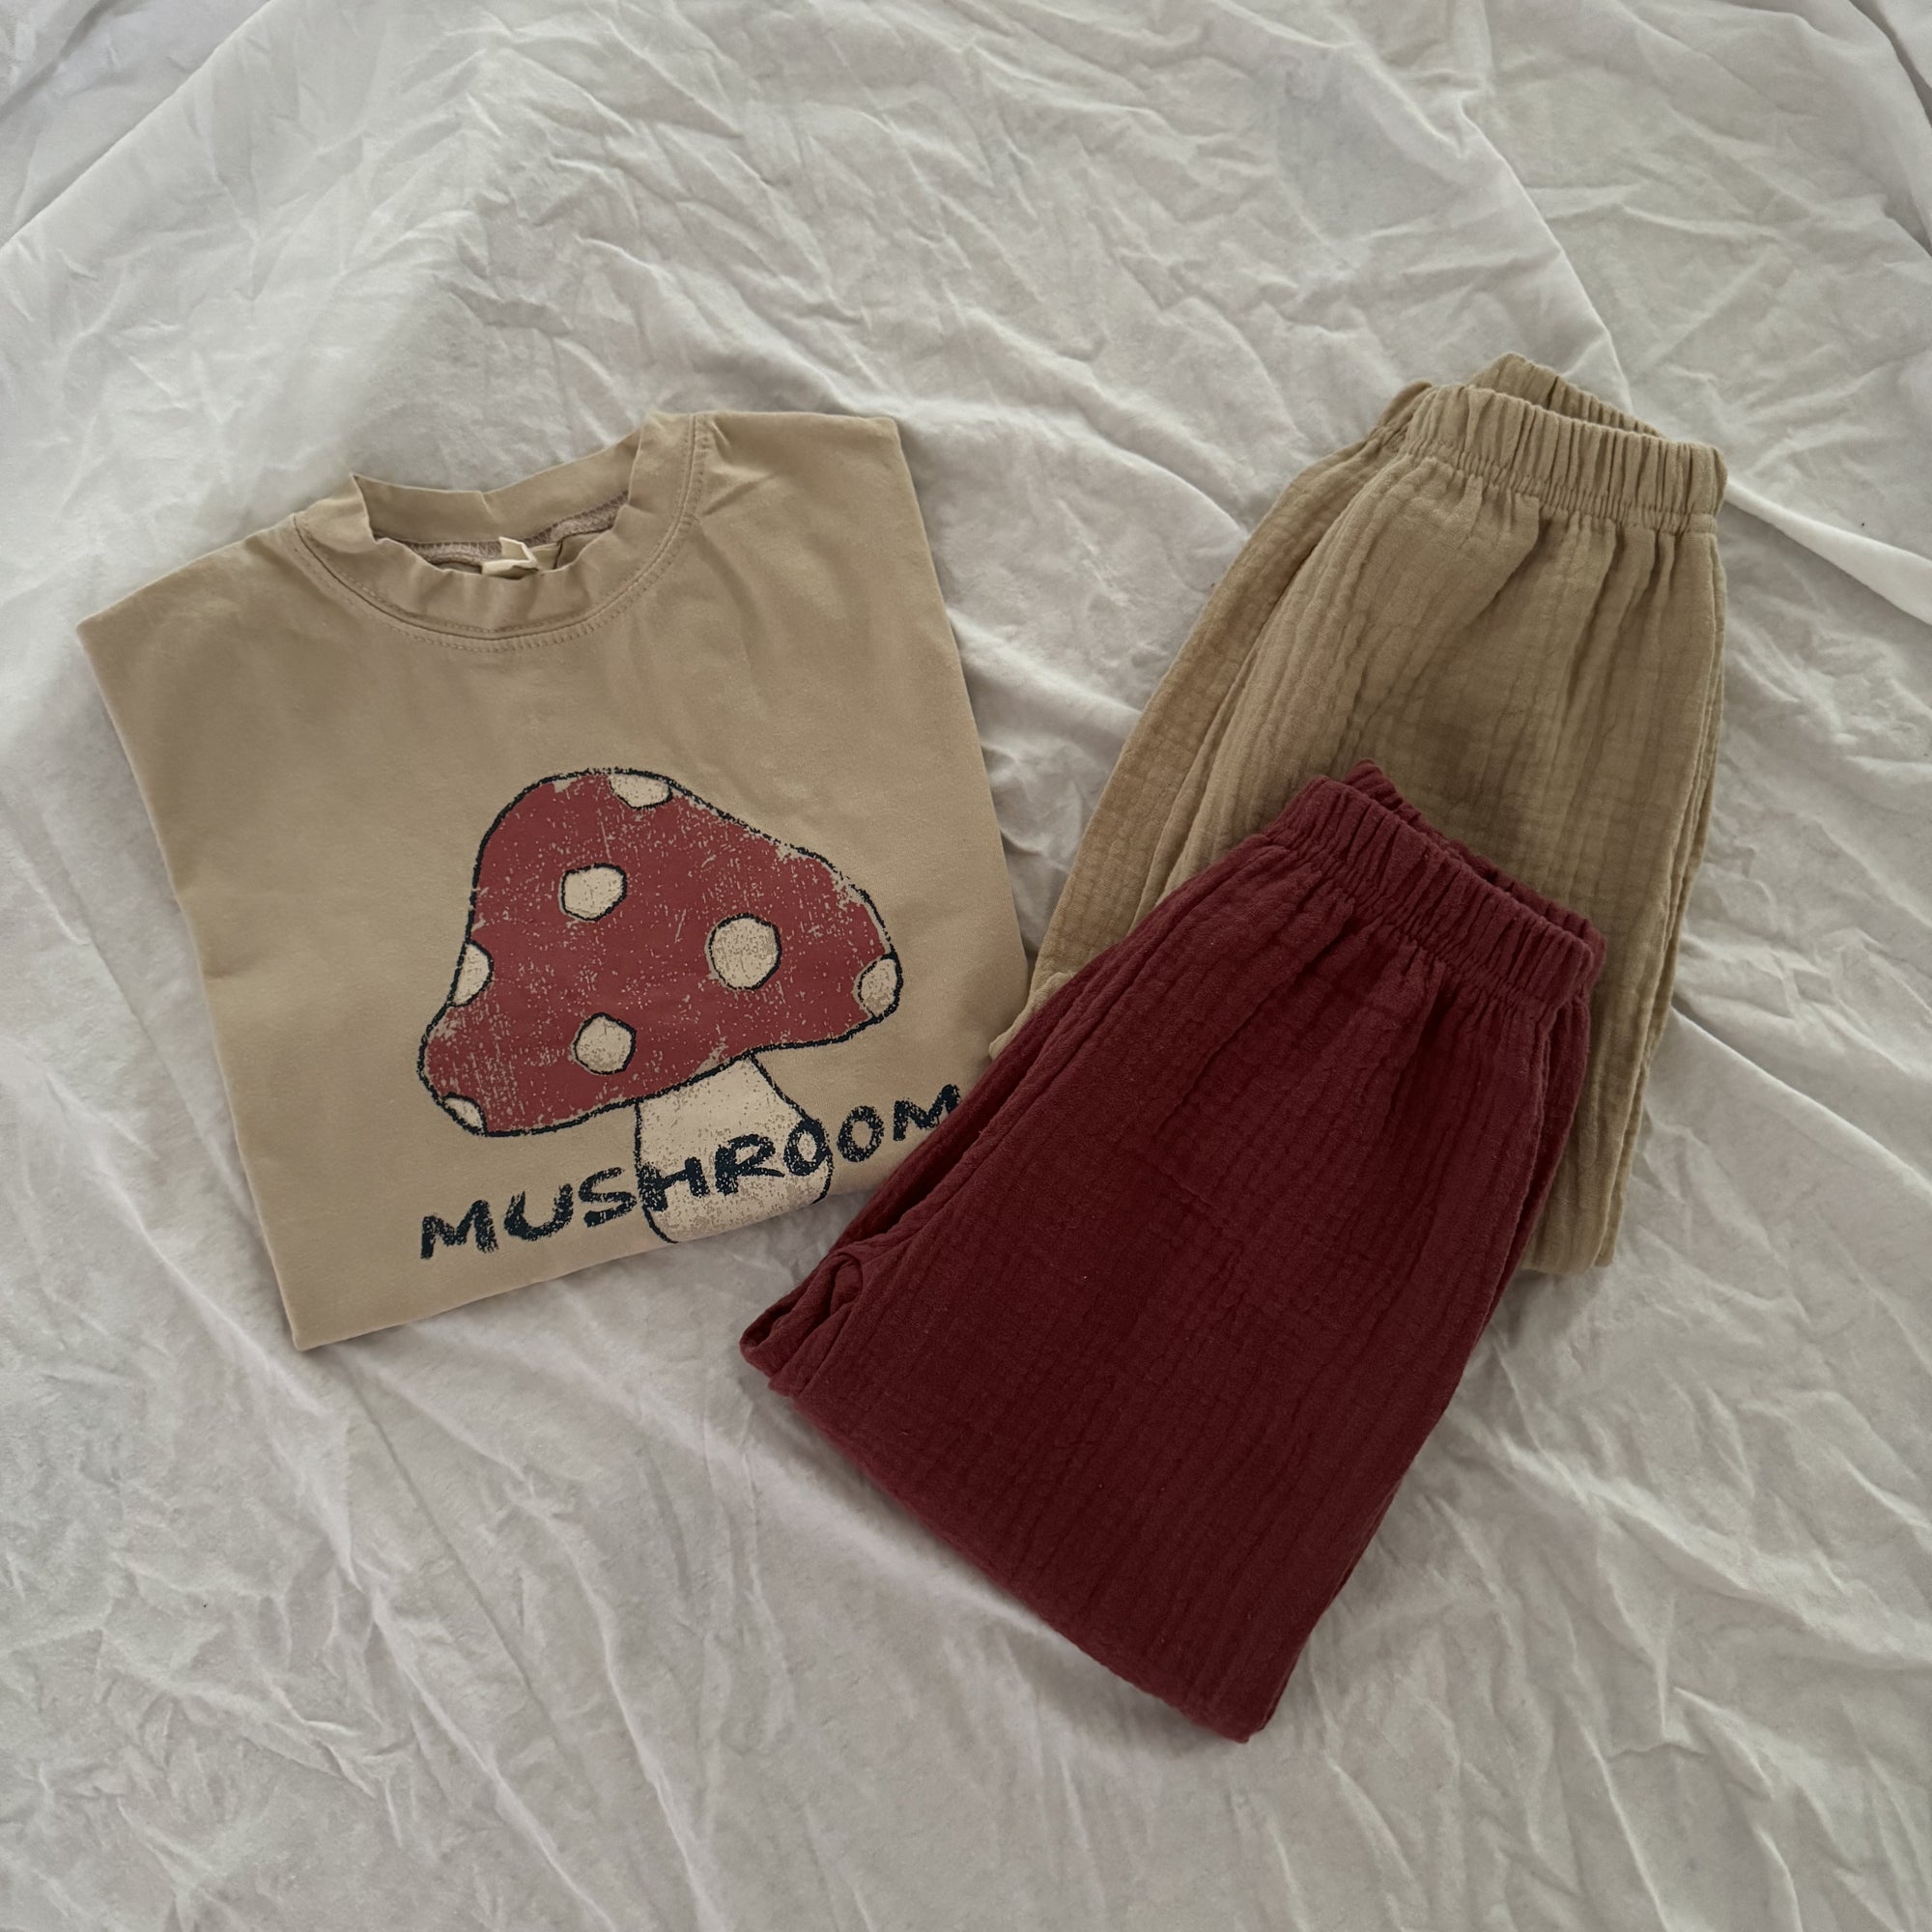 Mushroom Tee find Stylish Fashion for Little People- at Little Foxx Concept Store